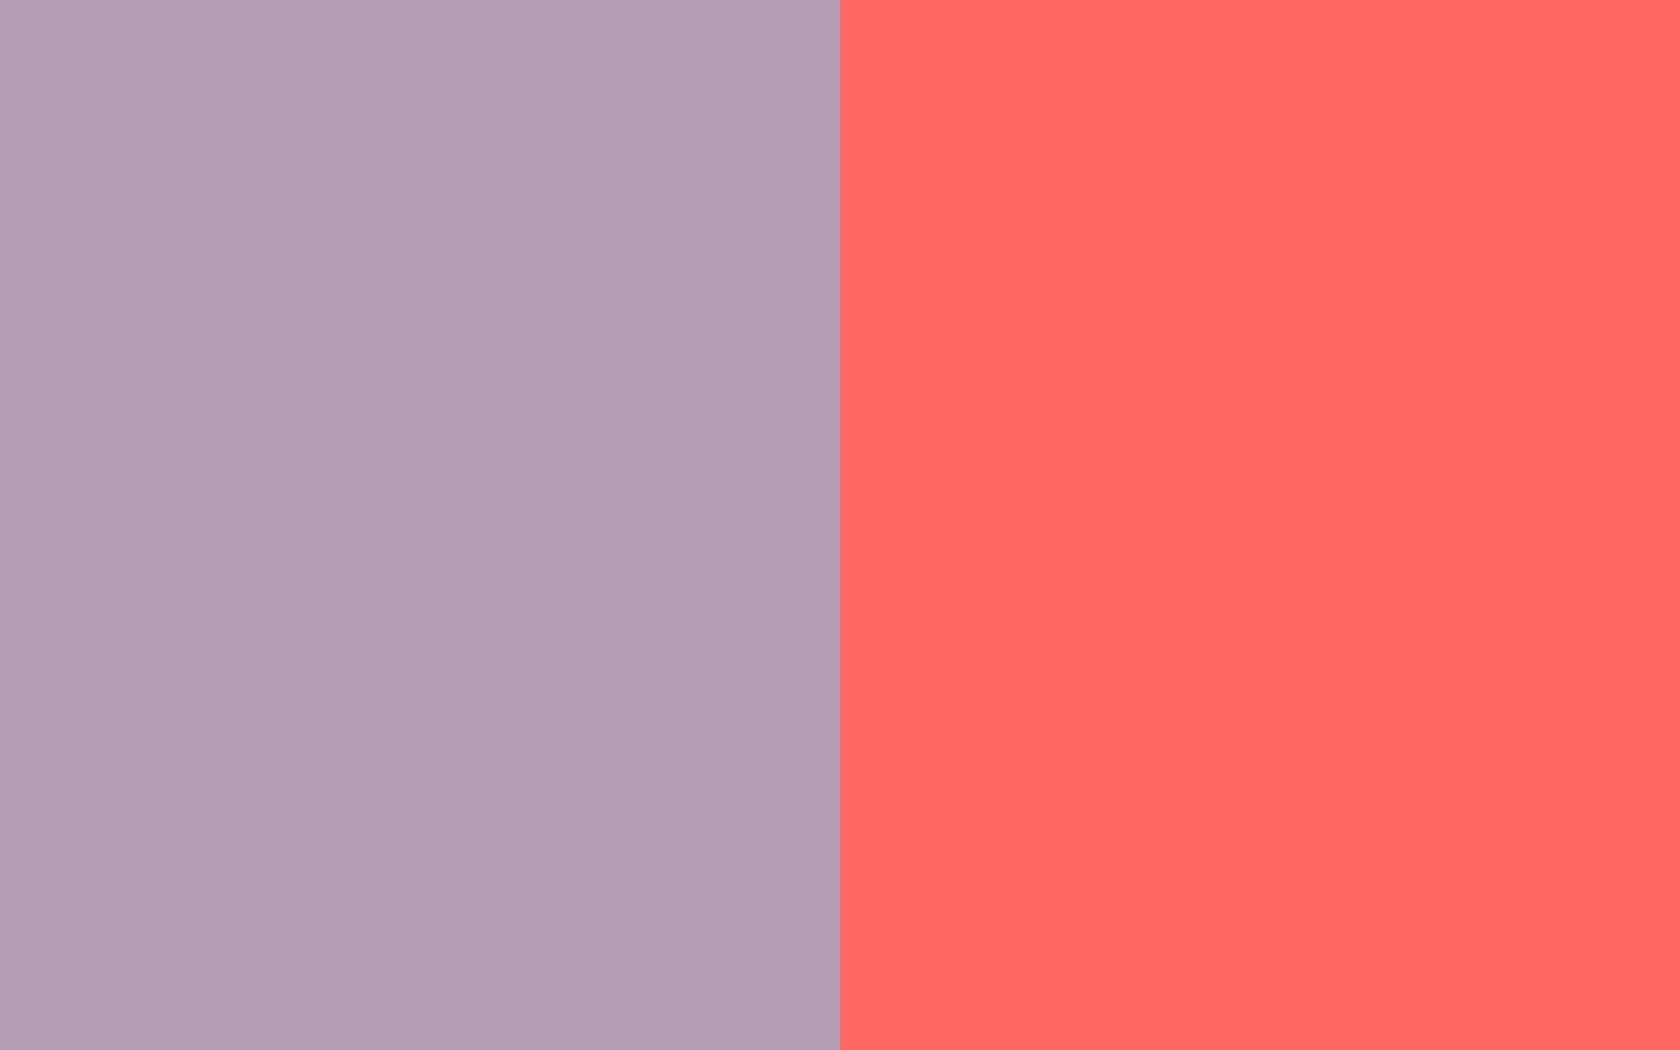 resolution Pastel Purple and Pastel Red solid two color background